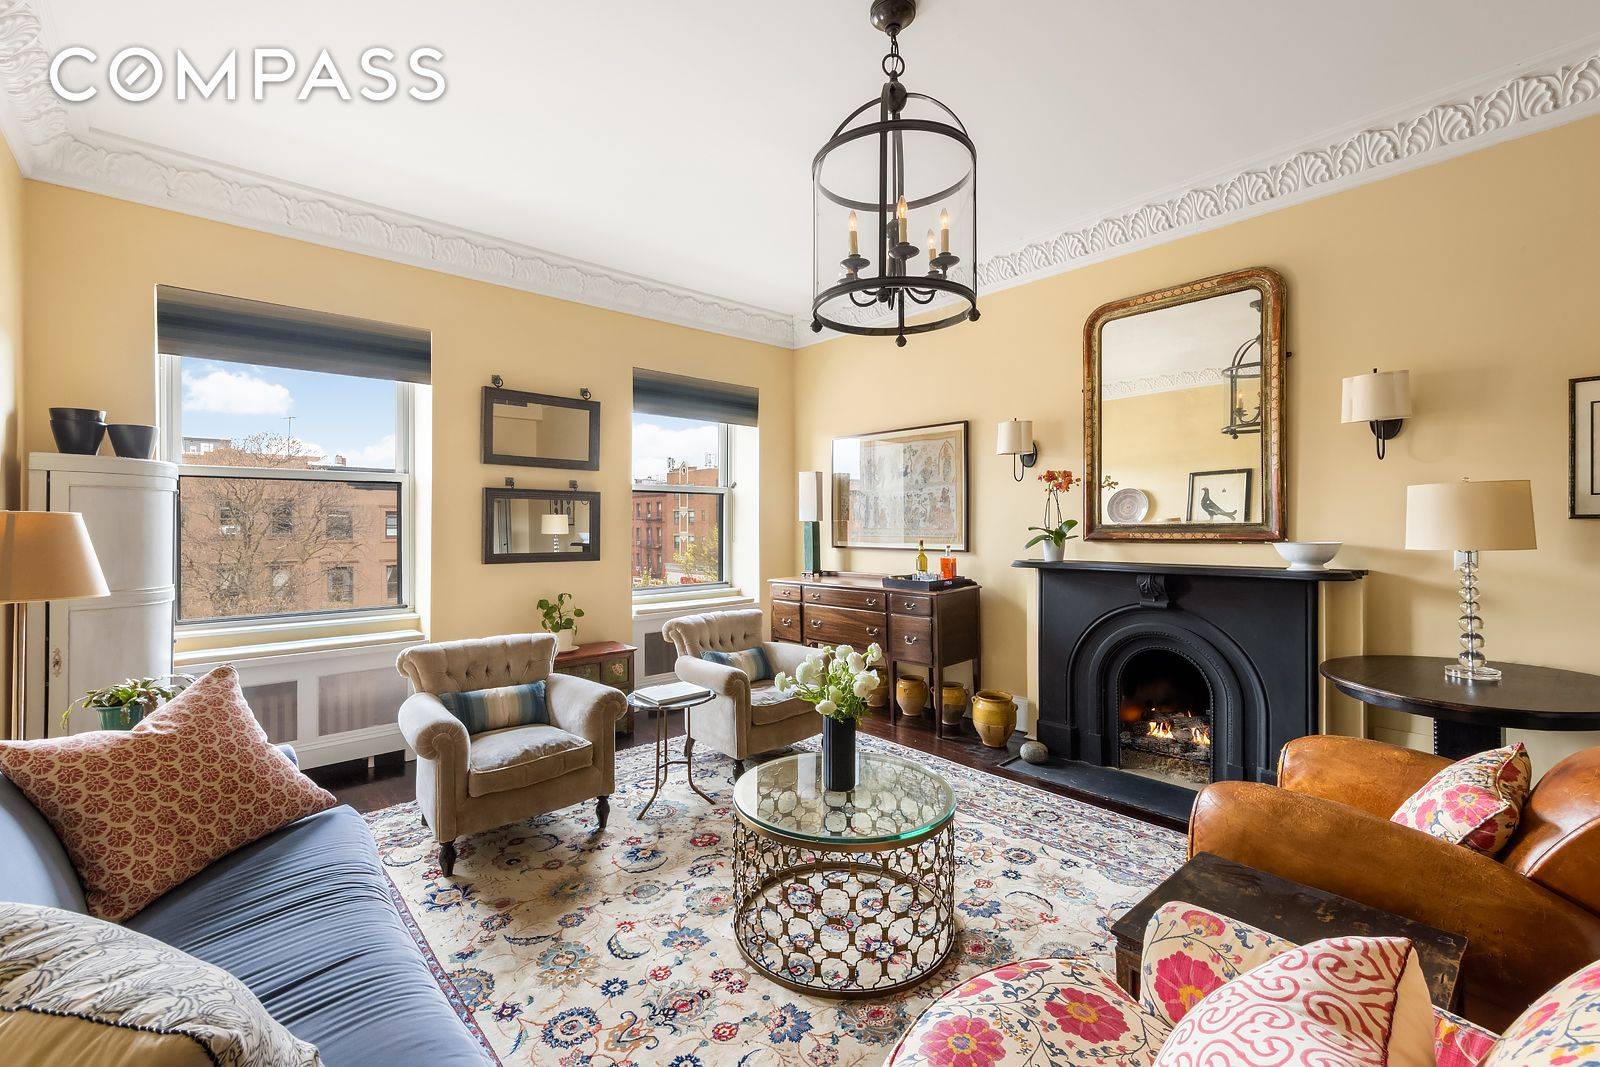 With stunning light, incredible big sky views from every room and two outdoor spaces, your magnificent townhouse duplex on a pristine Place block in Carroll Gardens awaits.